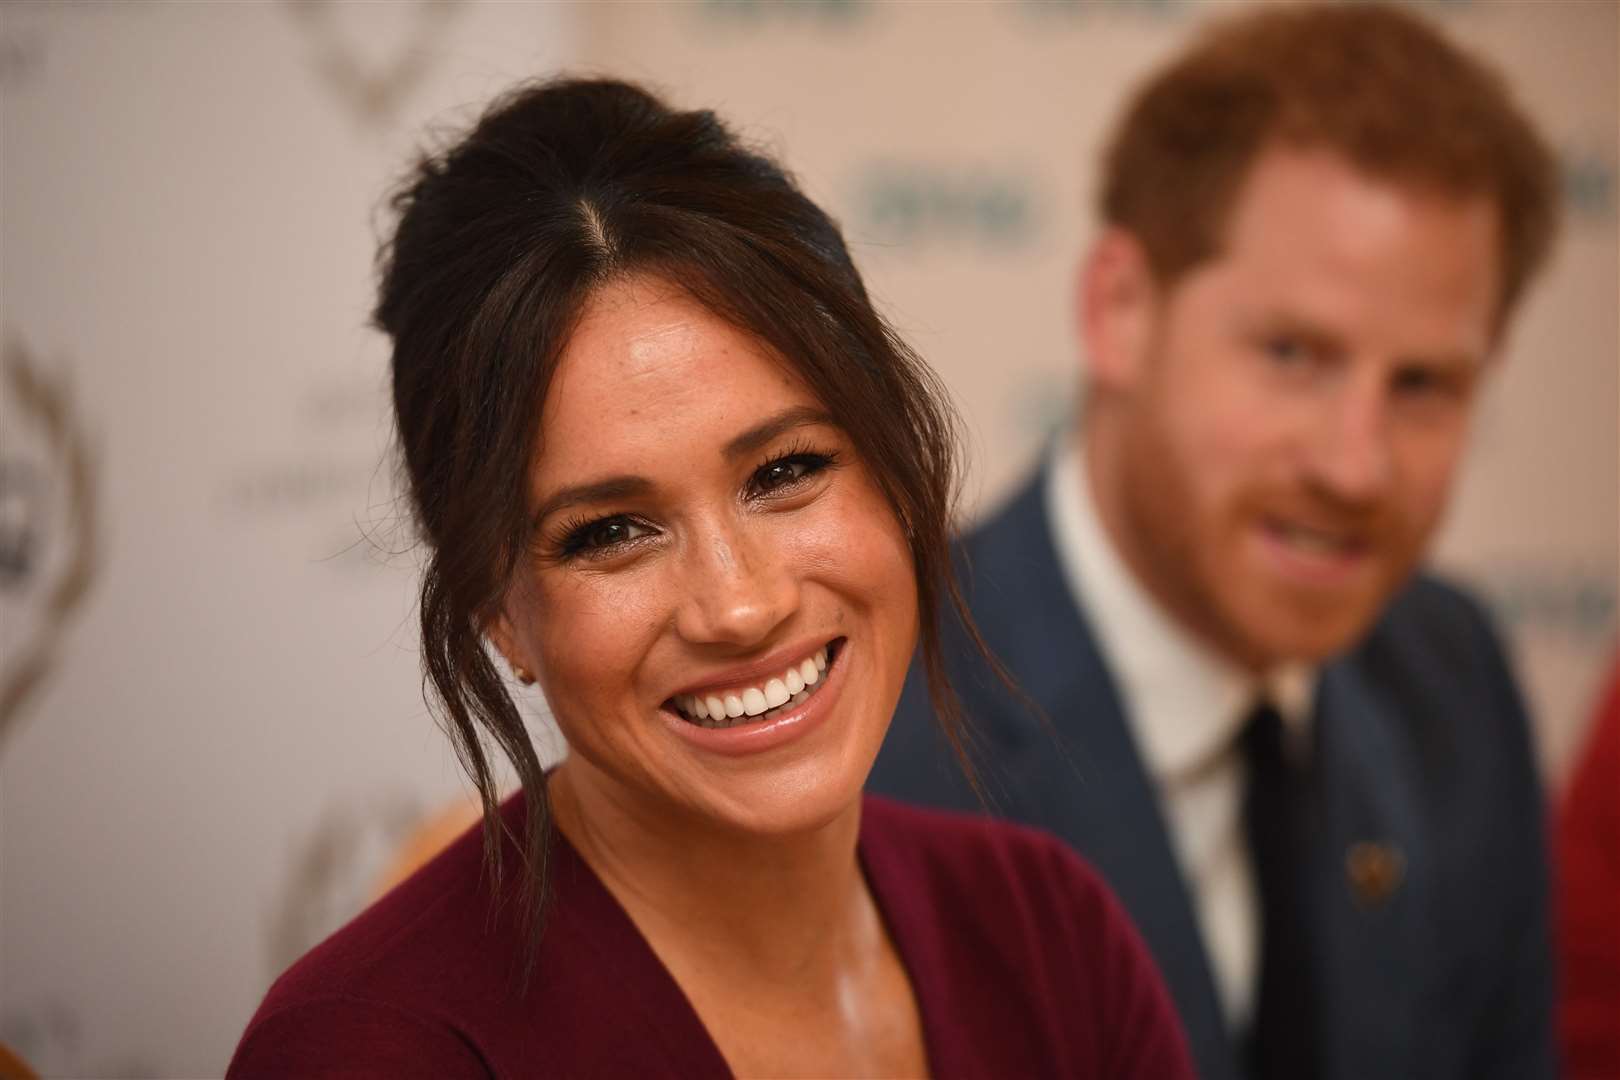 Meghan was approached about the Oprah interview before her wedding (Jeremy Selwyn/Evening Standard/PA)